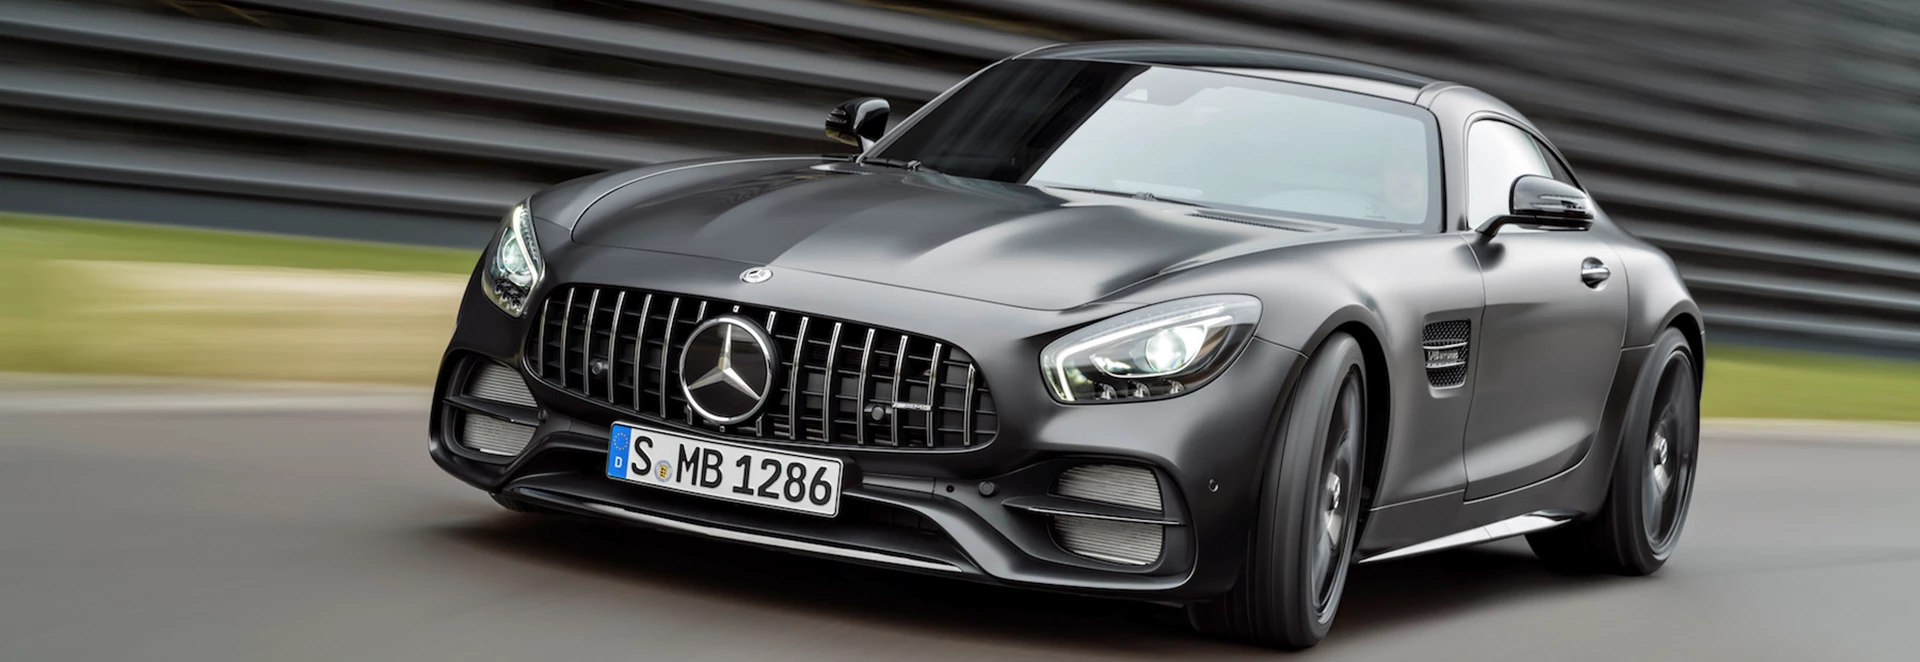 2017 Mercedes-AMG GT C Coupe Edition 50 Review 